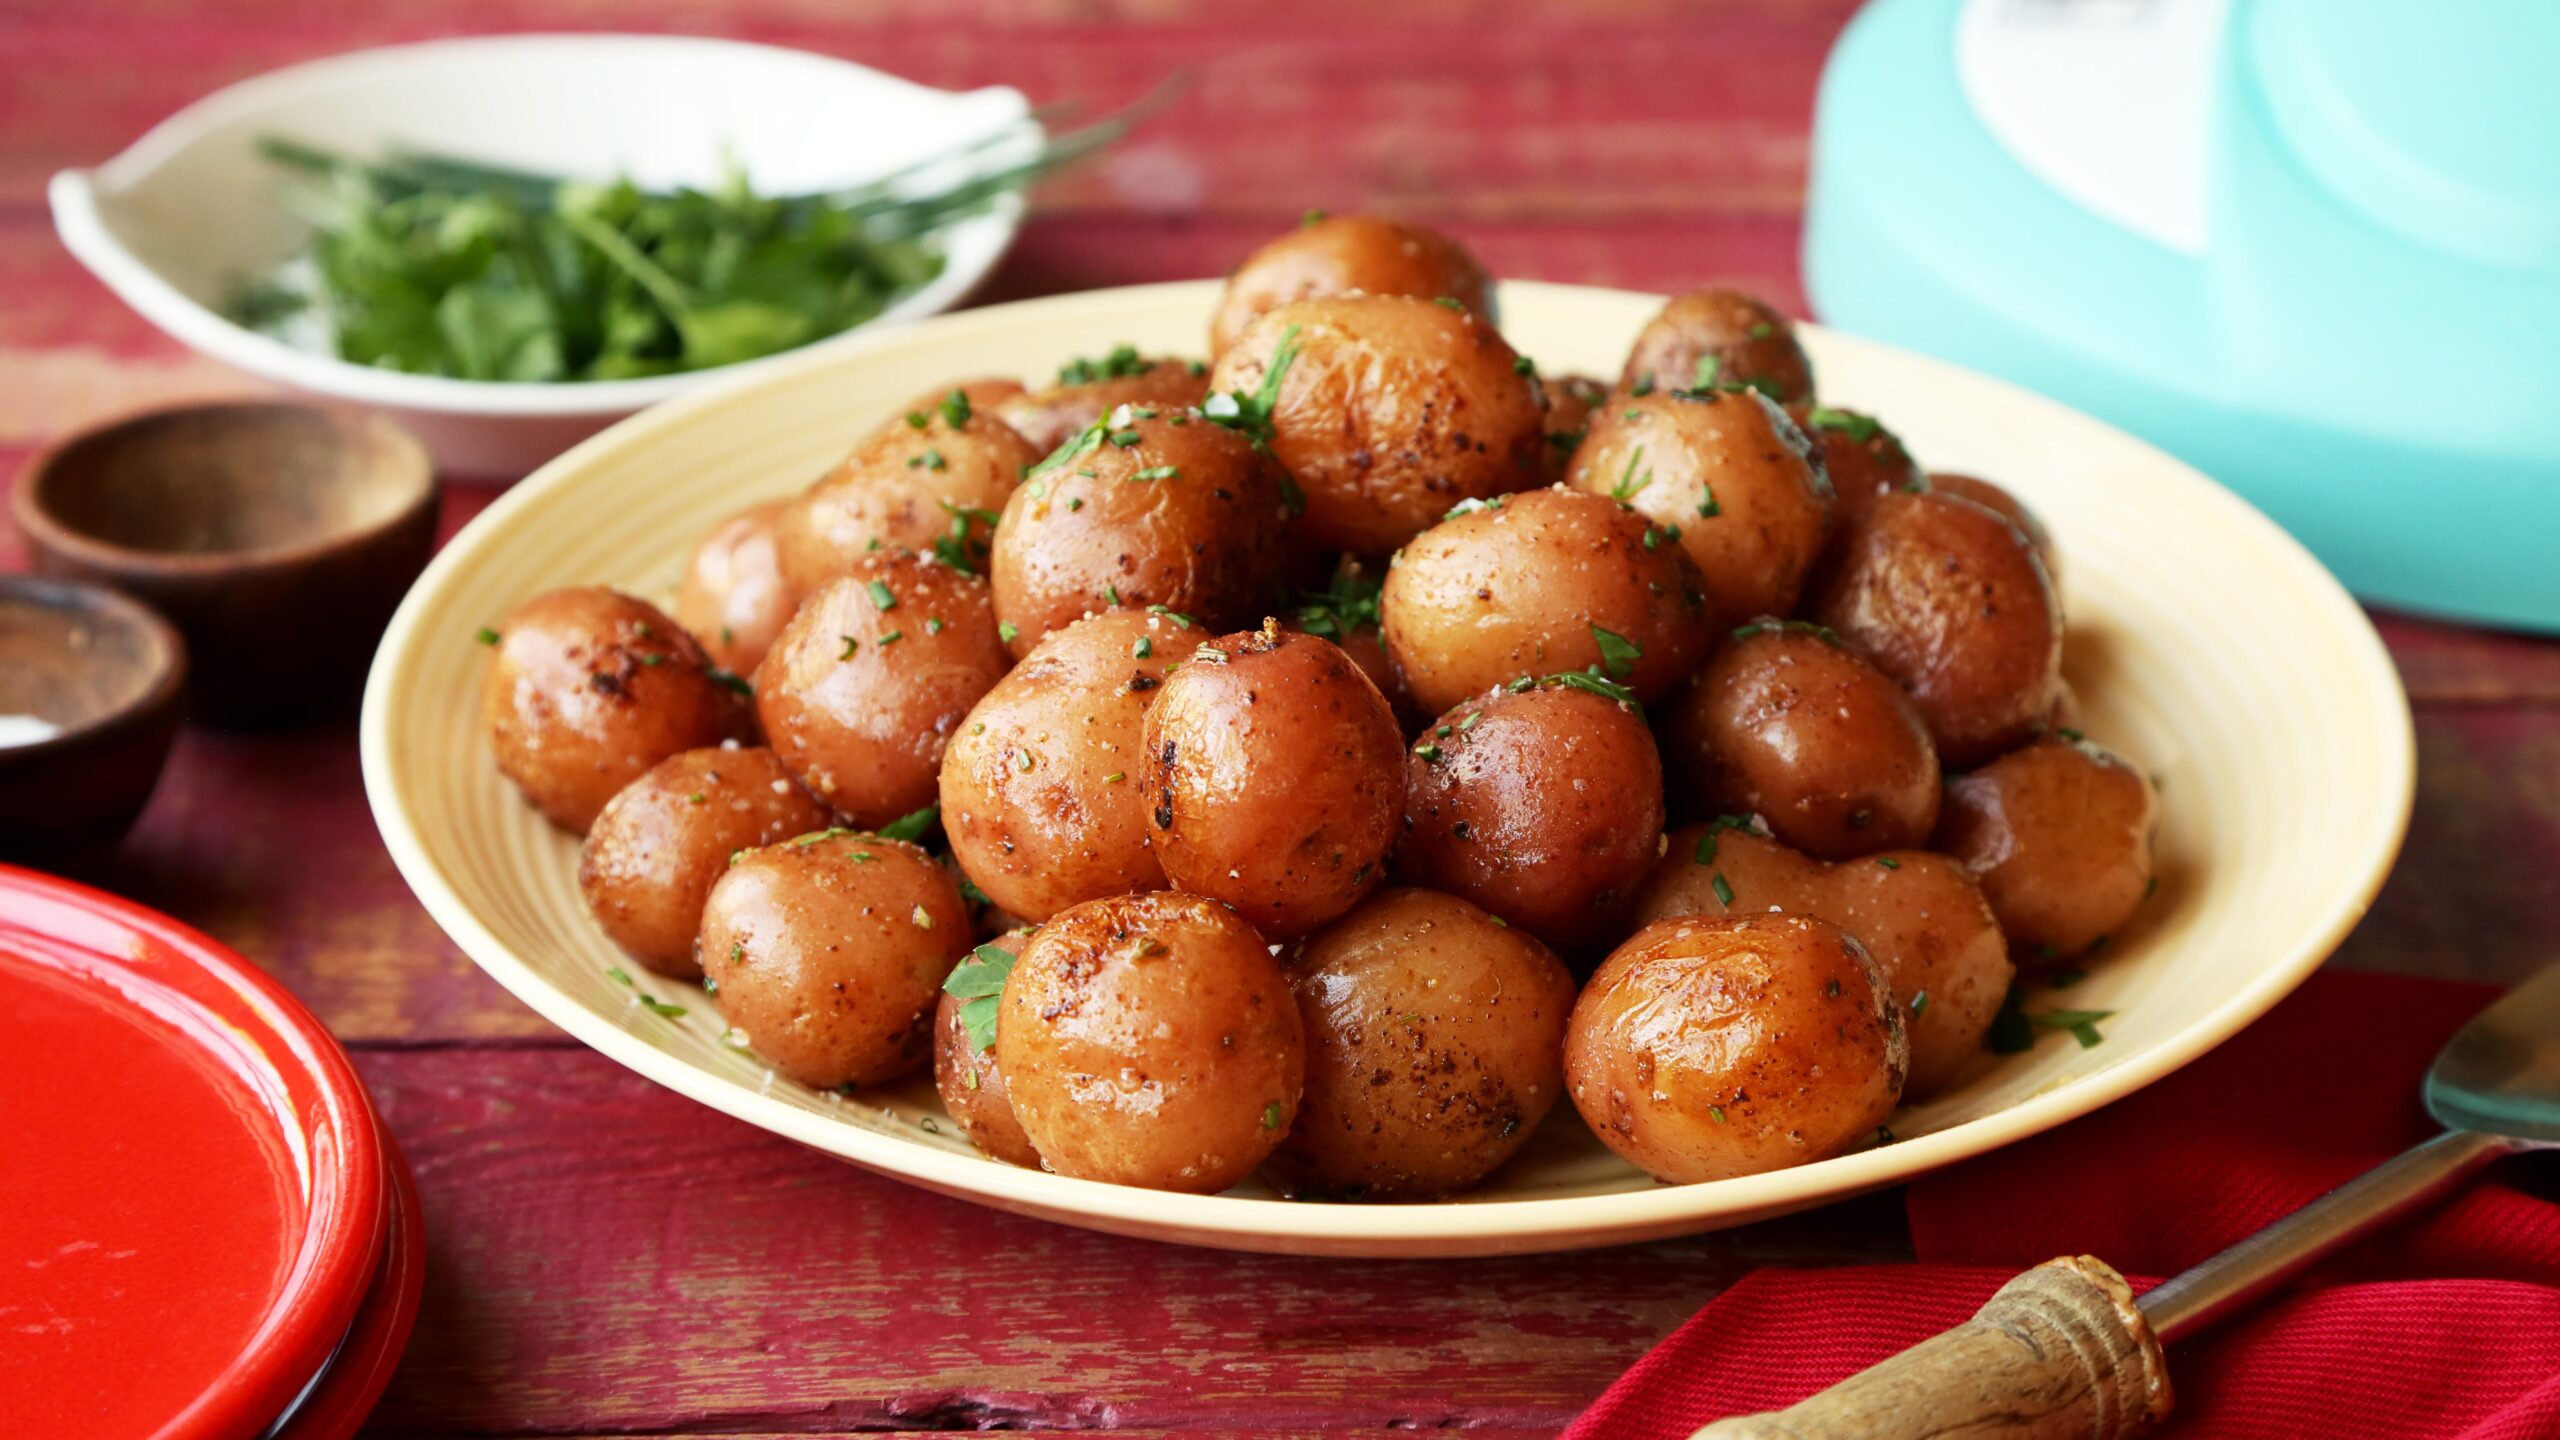  Crispy and golden brown, these potatoes are sure to be a hit!